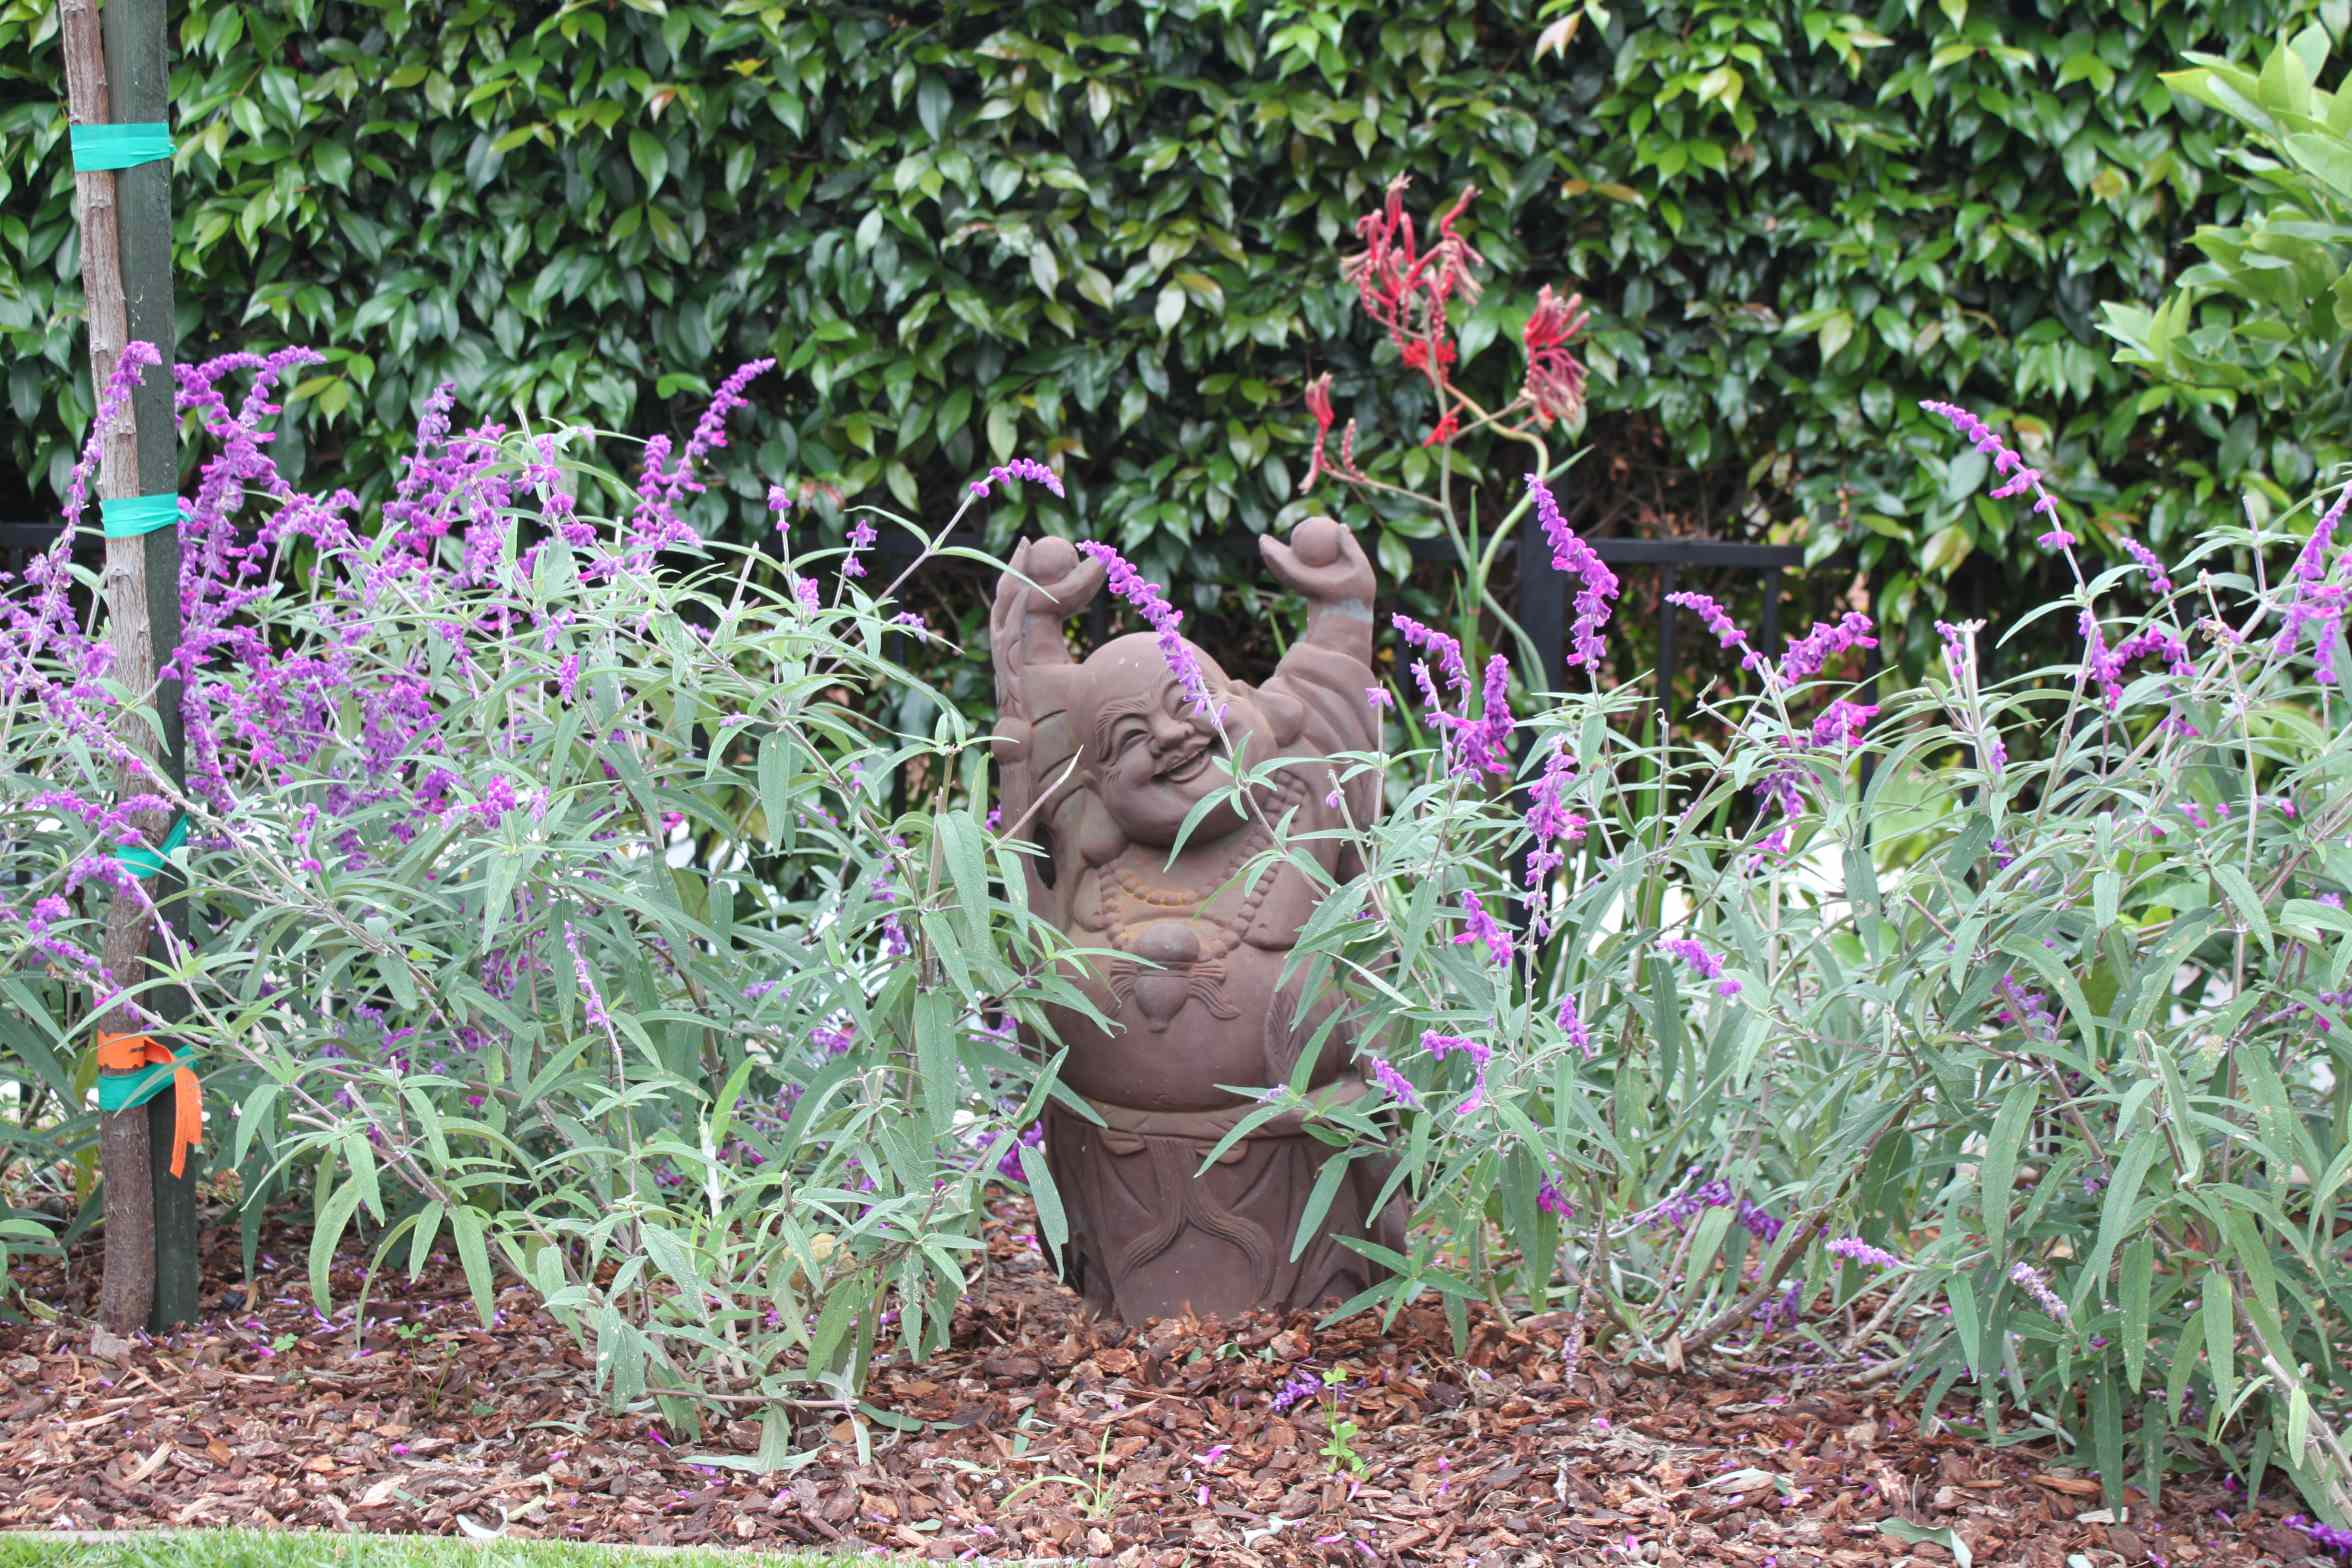 Garden Art Tucked Into the Plantings